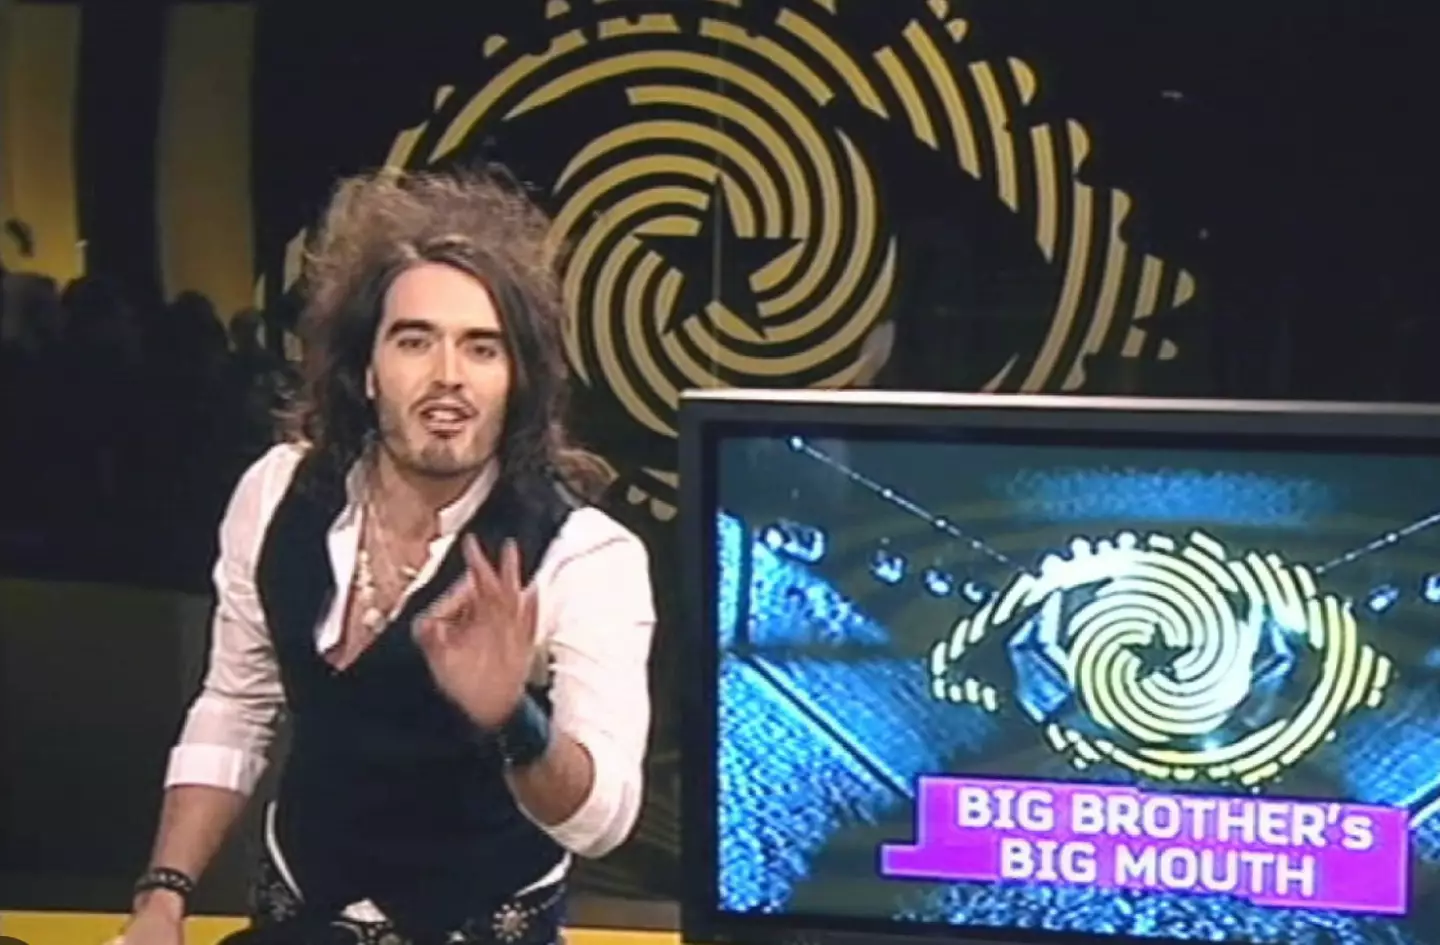 Russell Brand presenting Big Brother's Big Mouth.